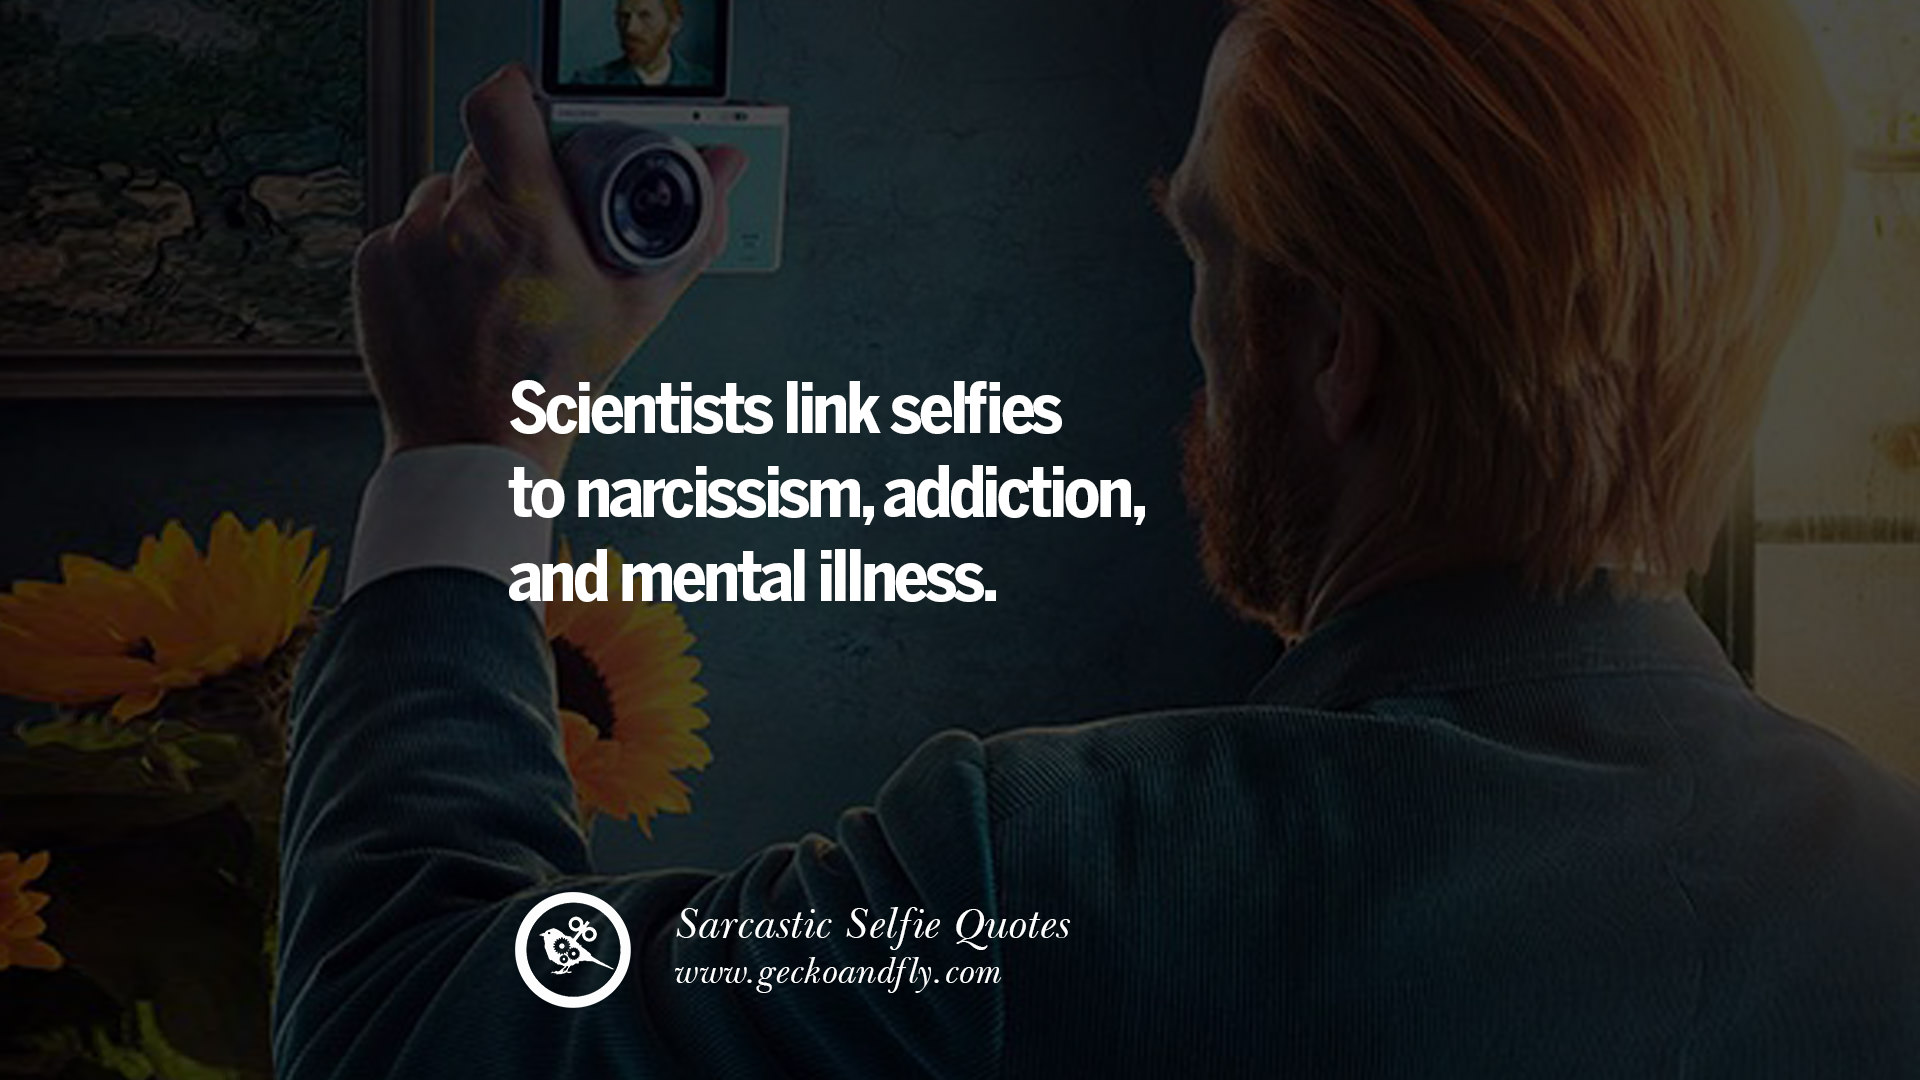 30 Sarcastic Anti-Selfie Quotes For Facebook And Instagram Friends